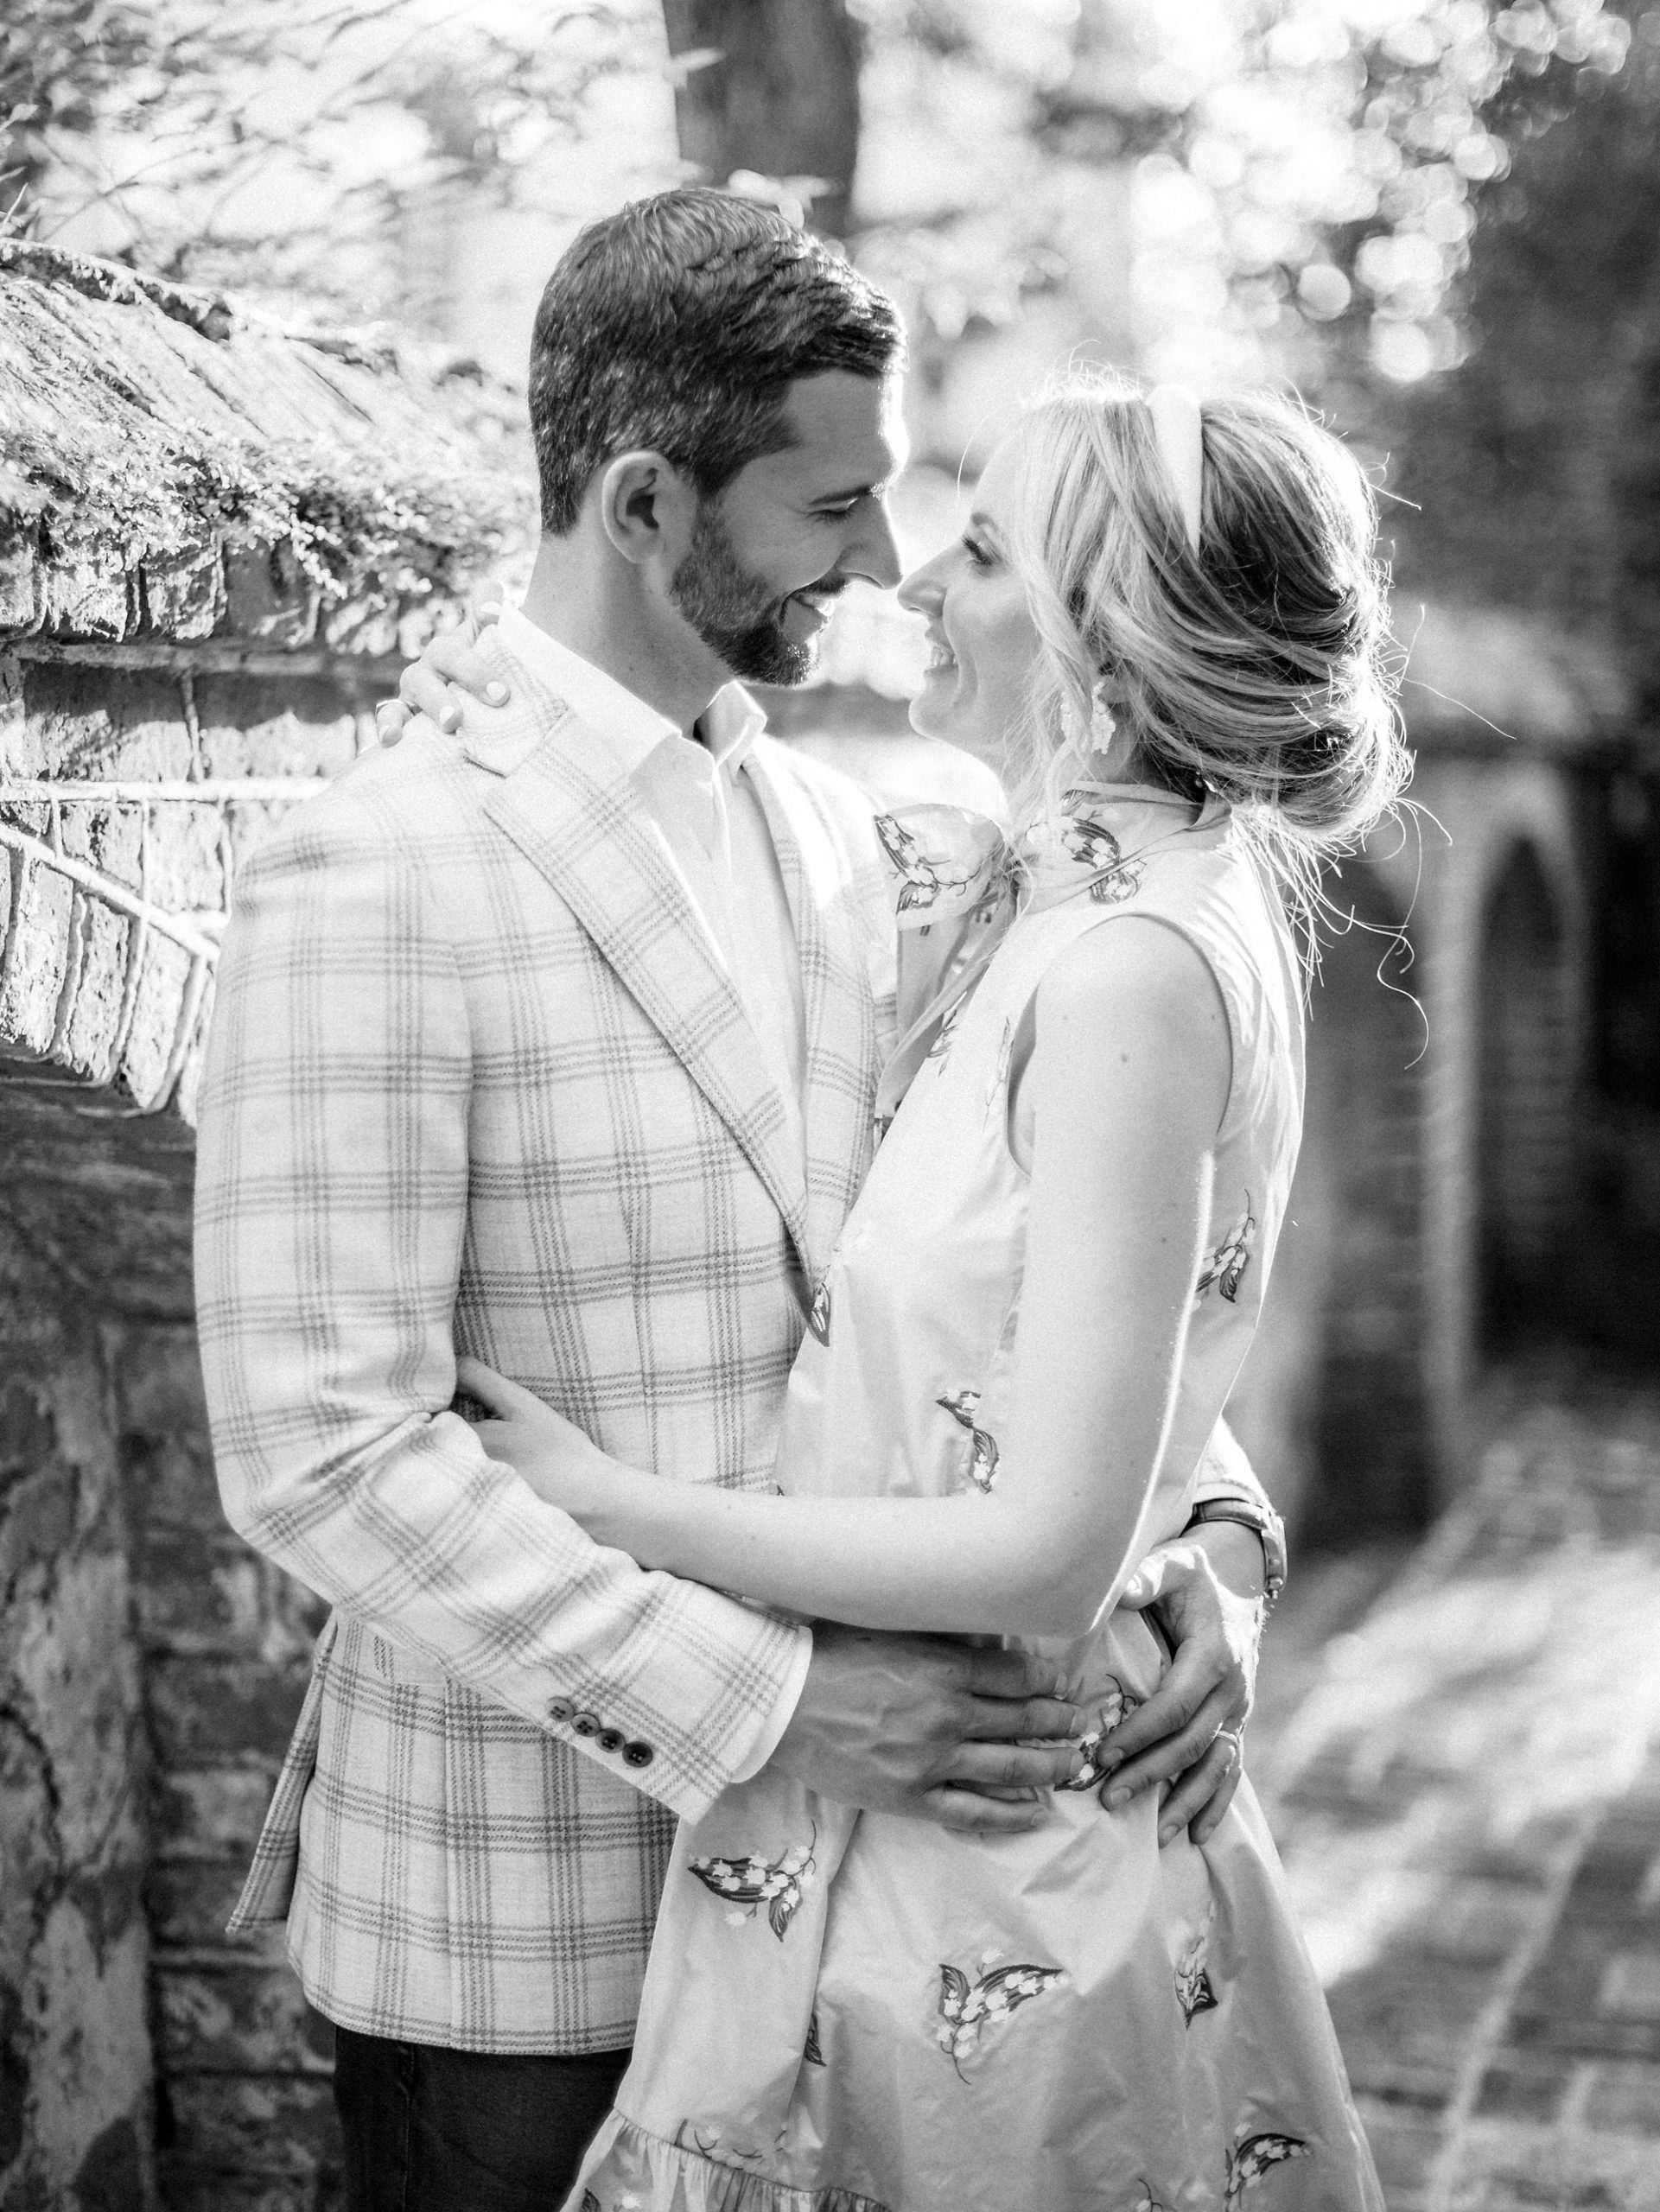 married couple hugs on street with brick wall